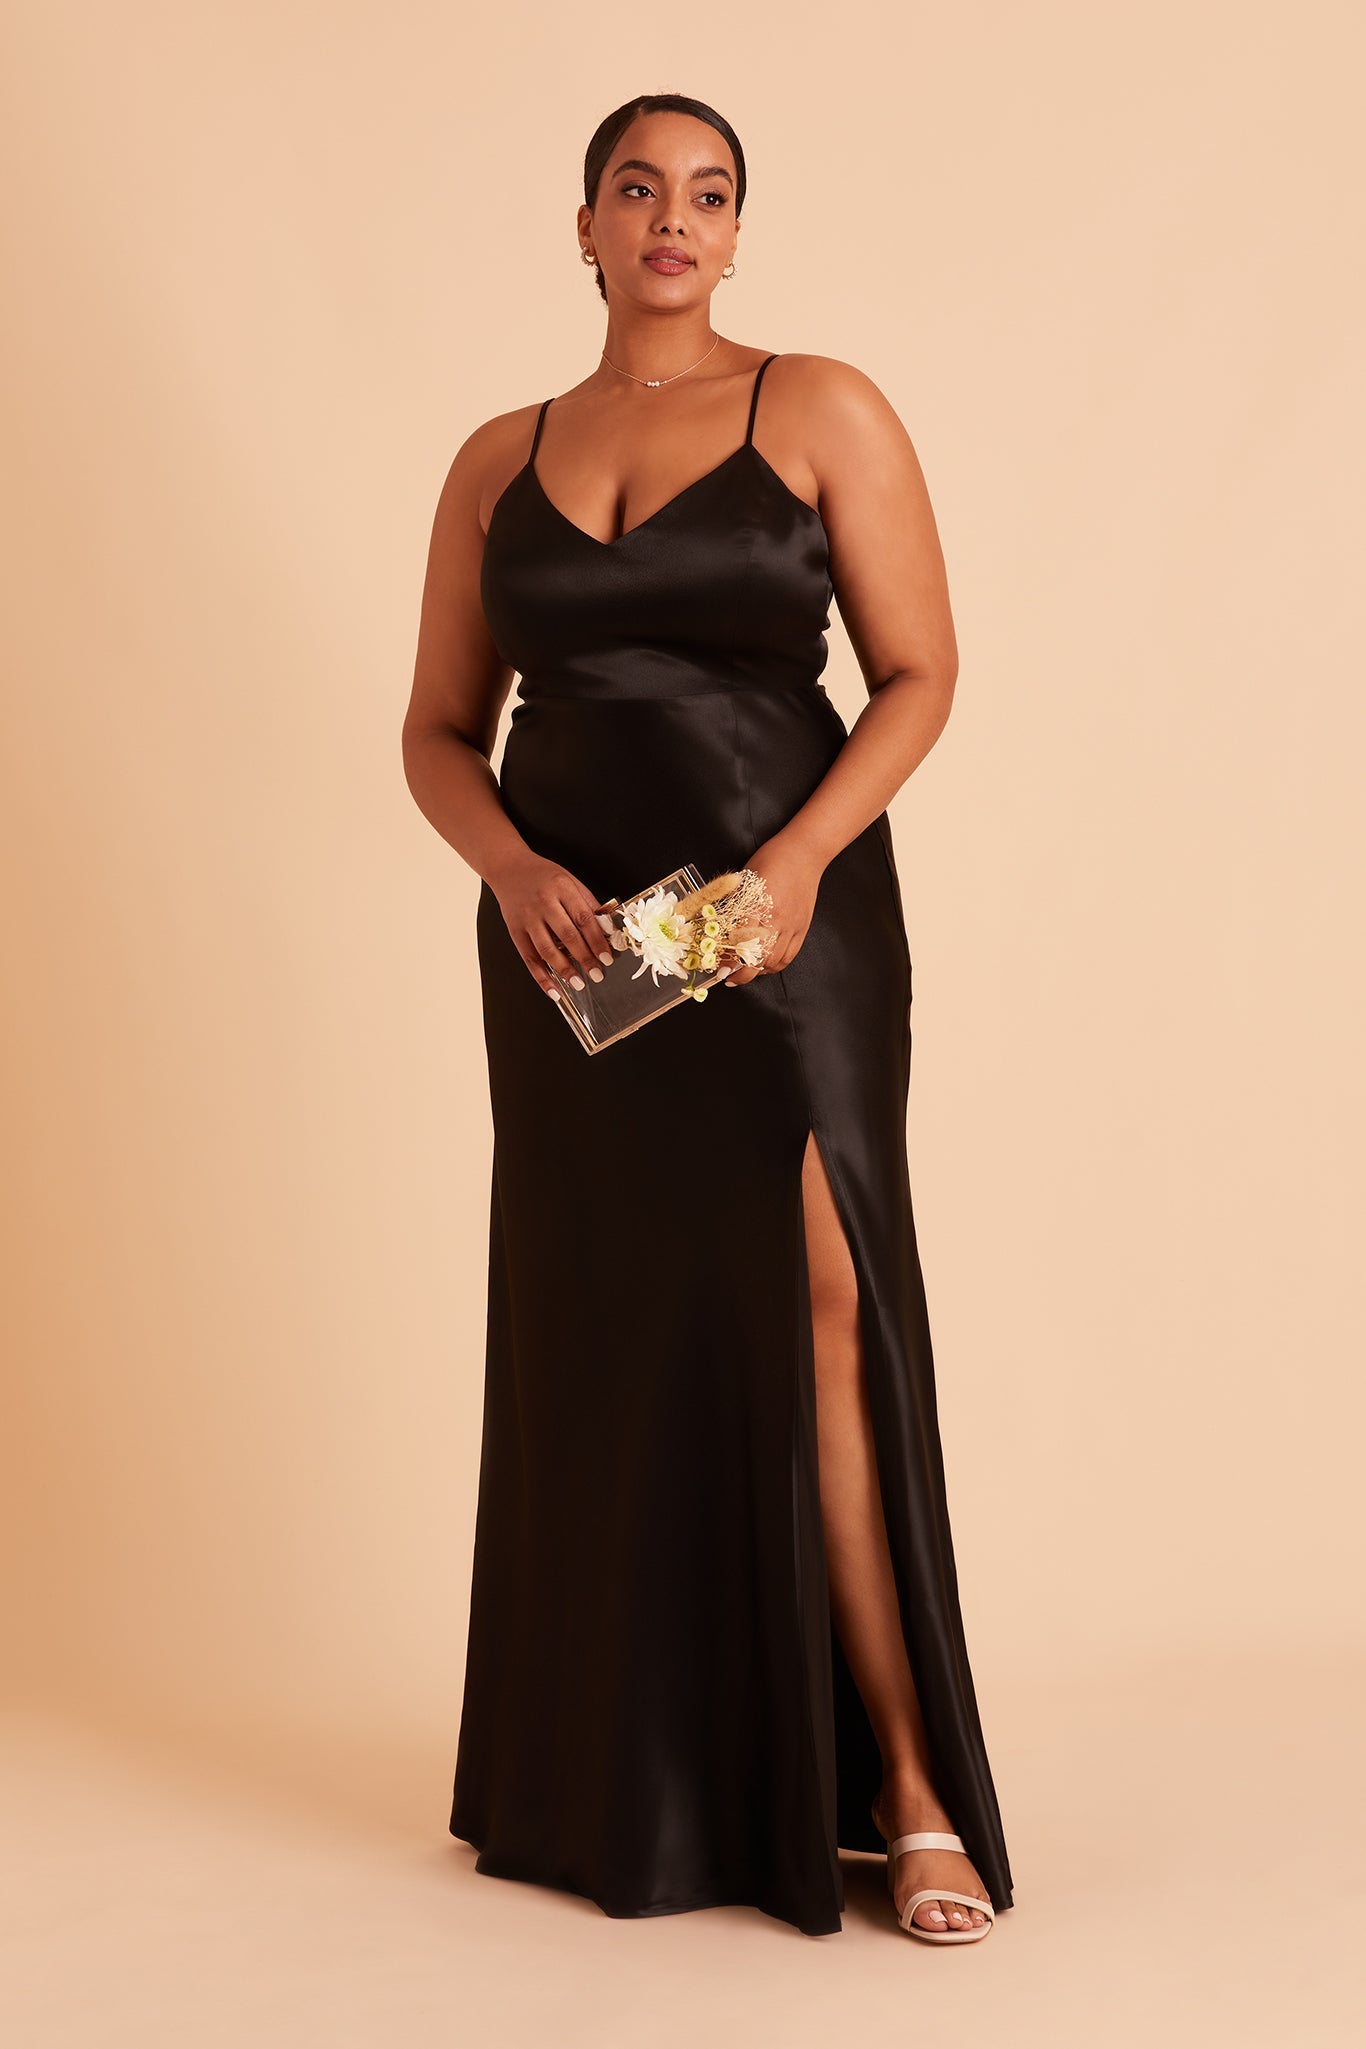 Jay plus size bridesmaid dress with slit in black satin by Birdy Grey, front view